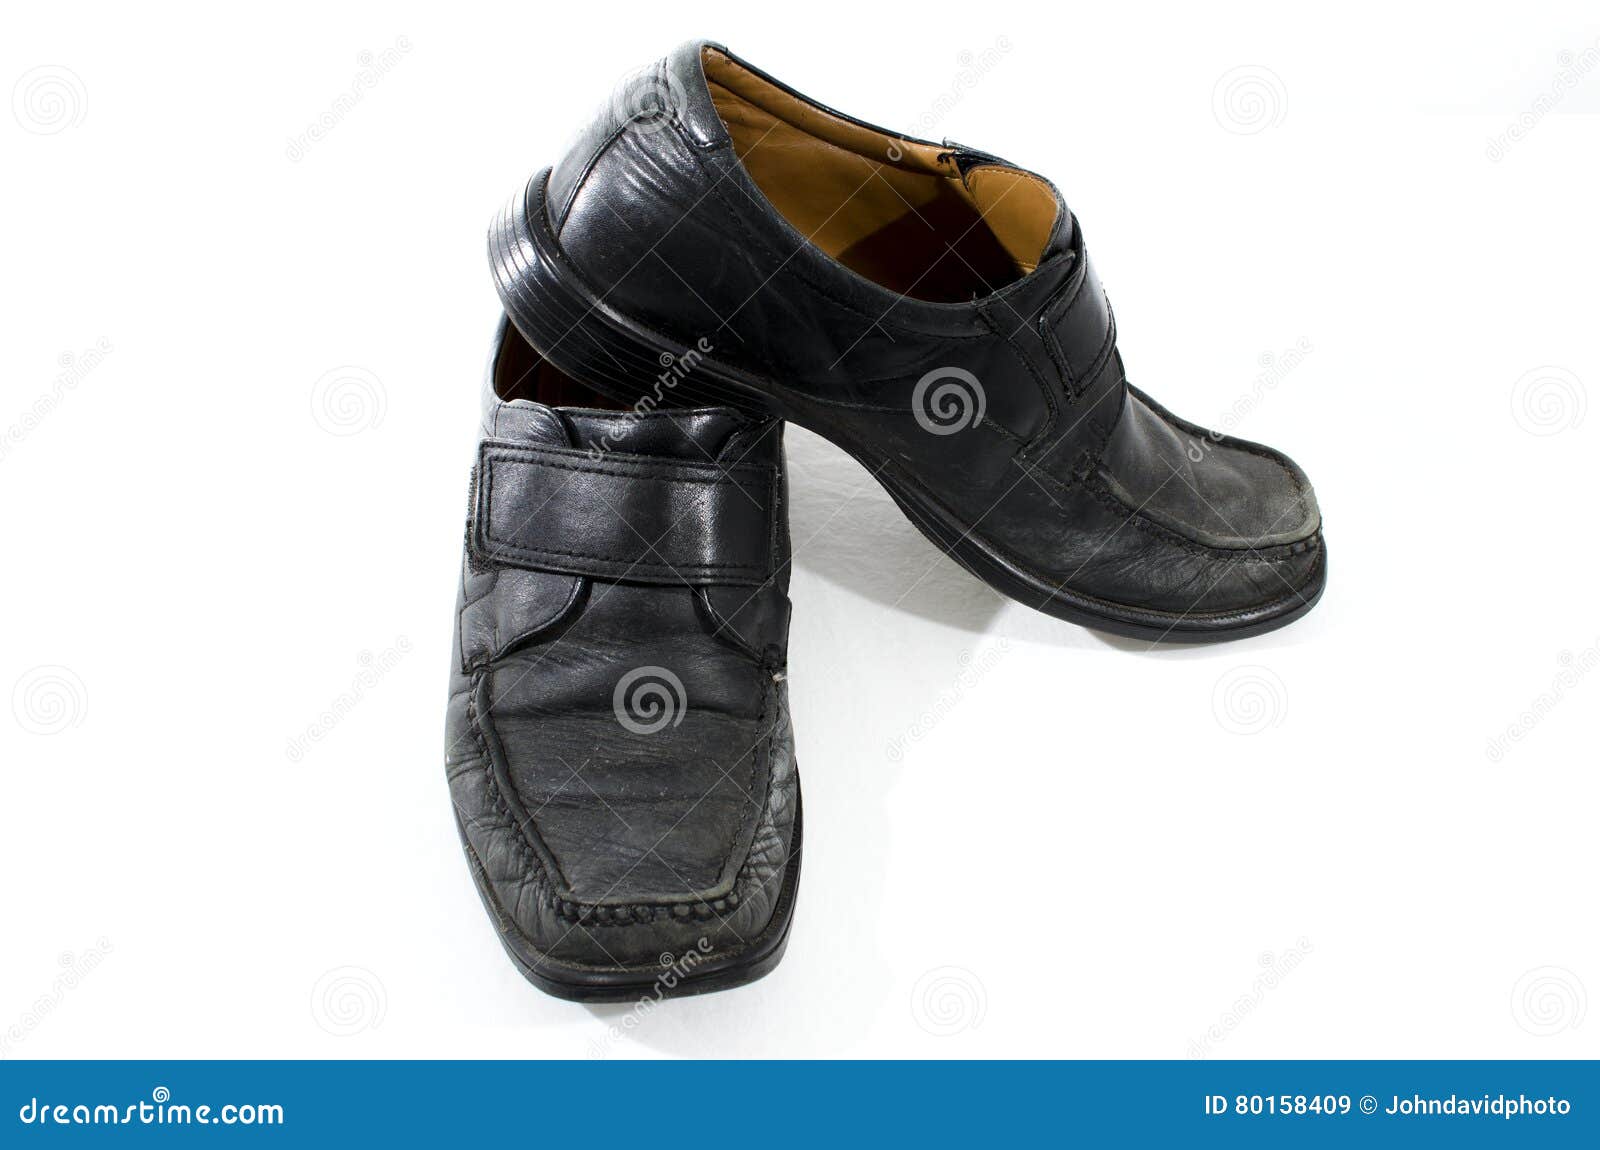 Old Used and Worn Black Leather Shoes Stock Image - Image of mans ...